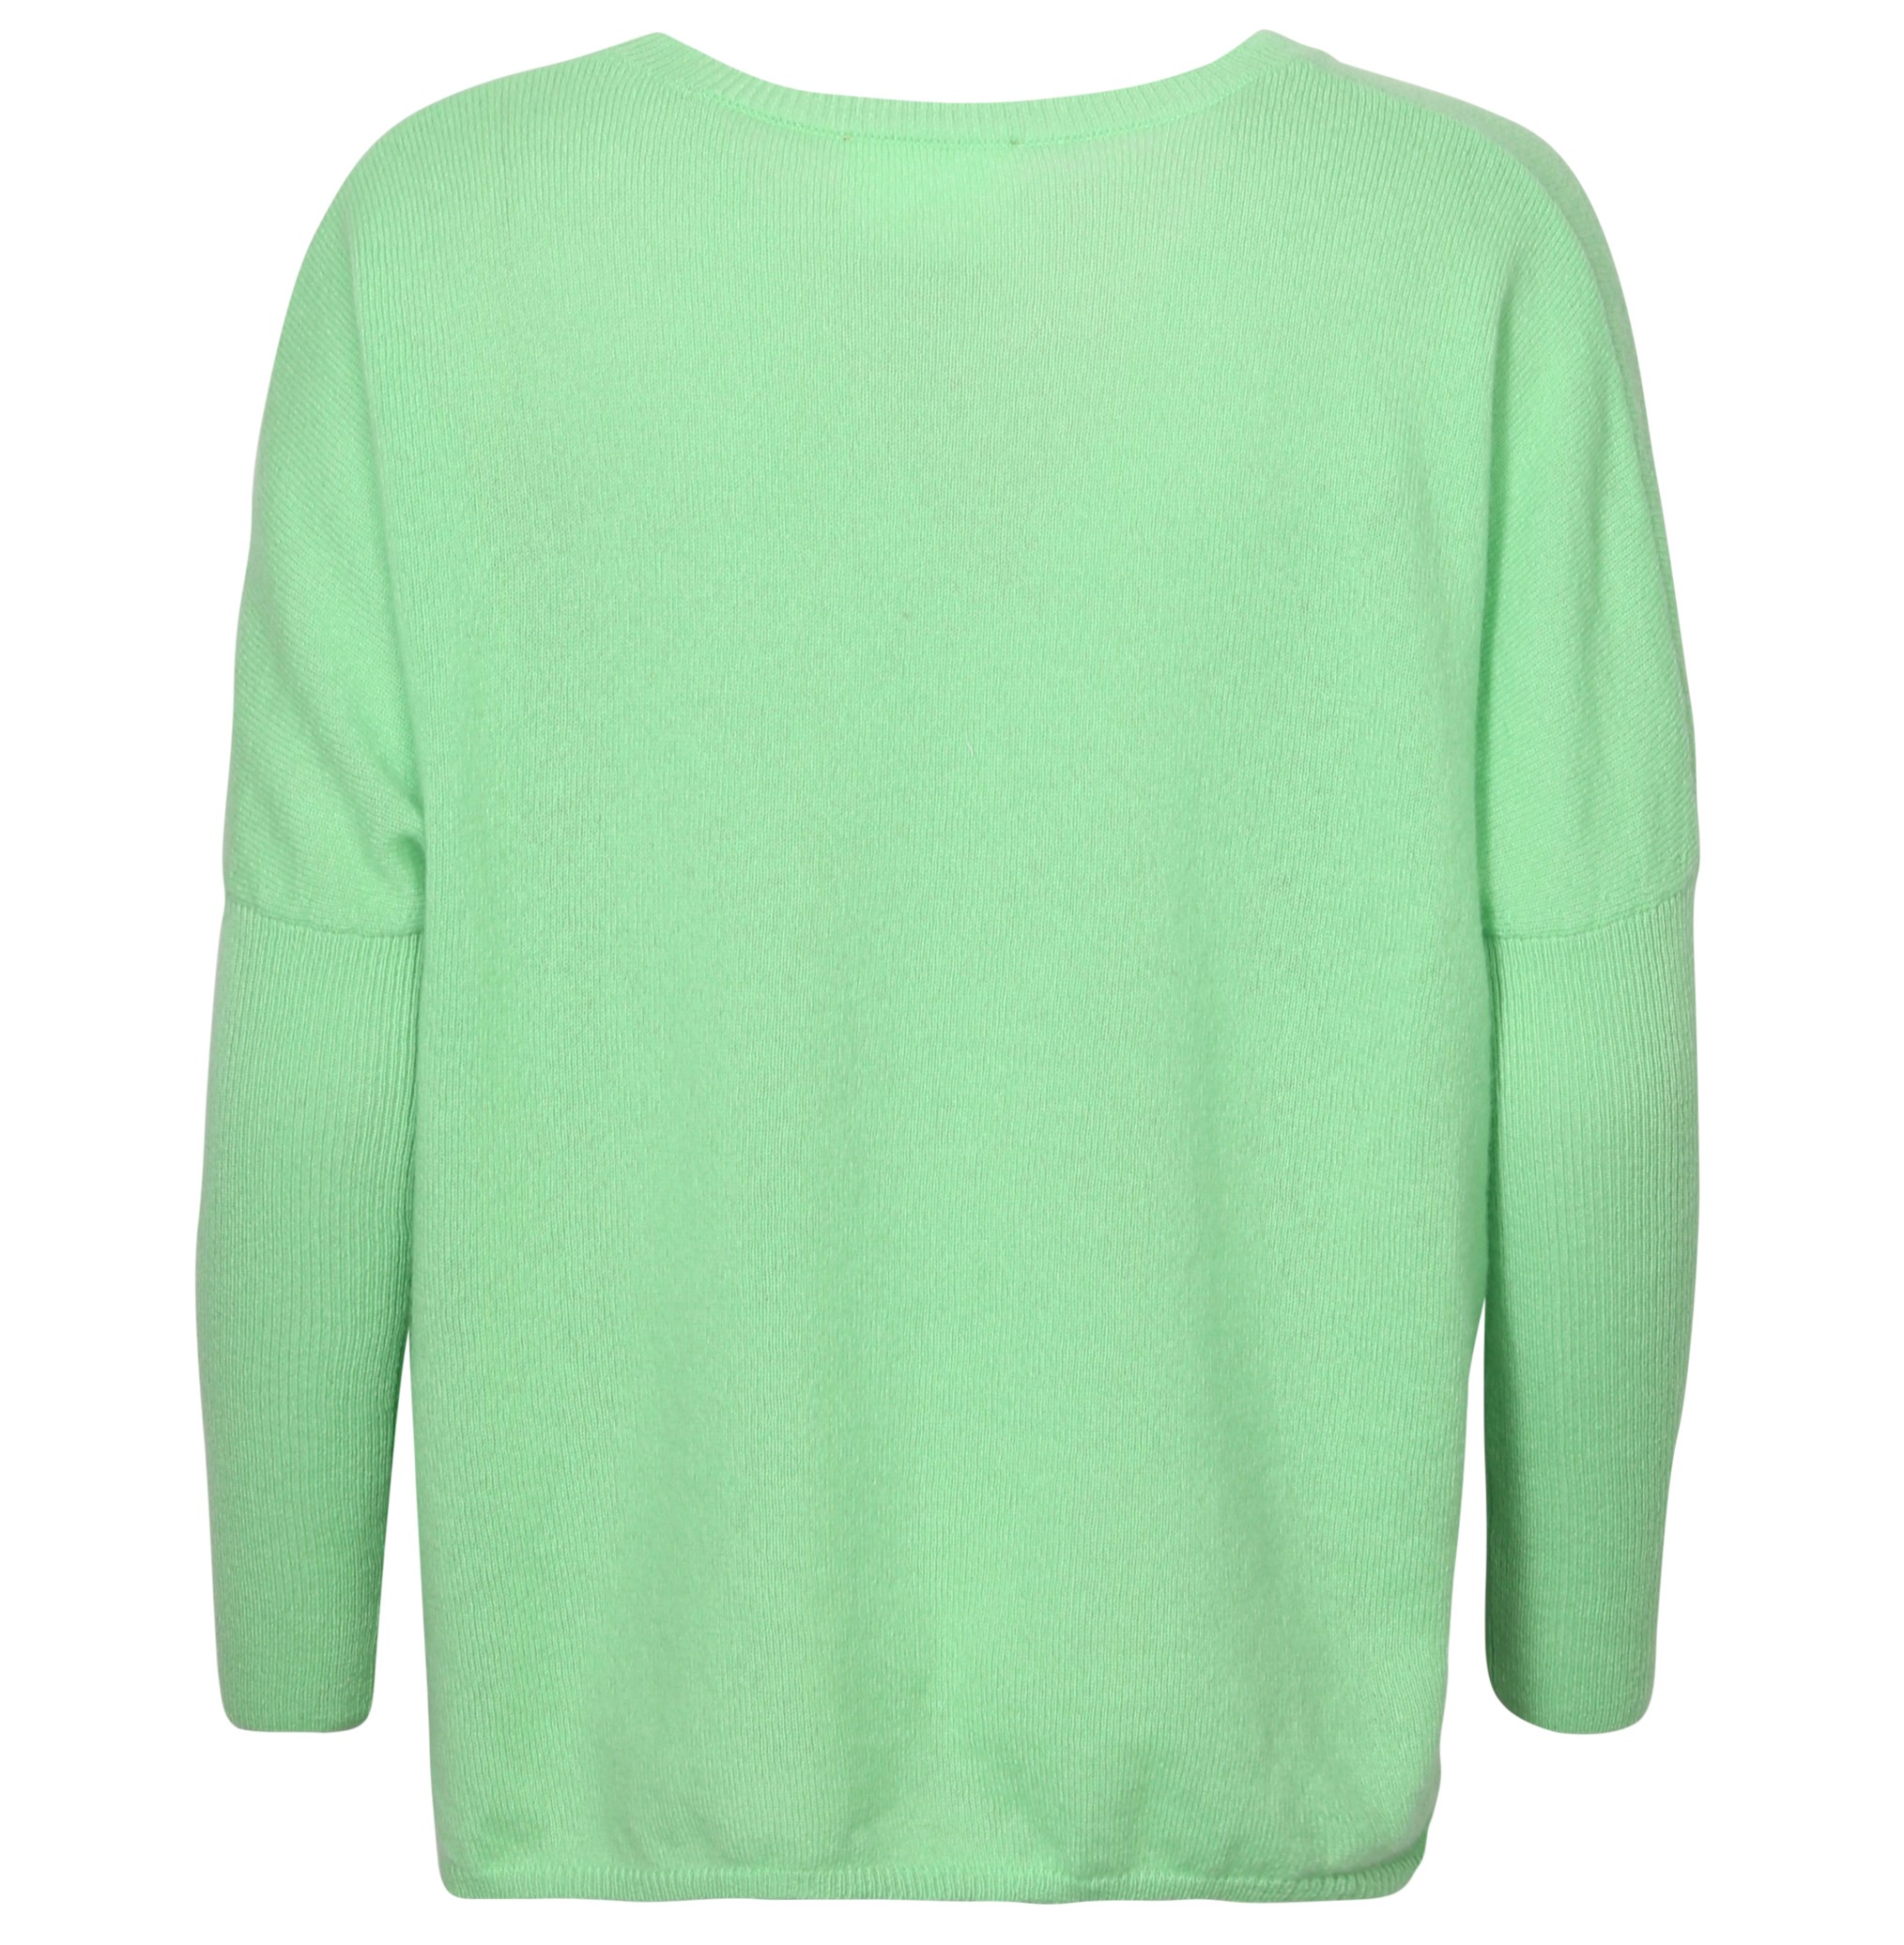 ABSOLUT CASHMERE Poncho Sweater Astrid in Light Green L